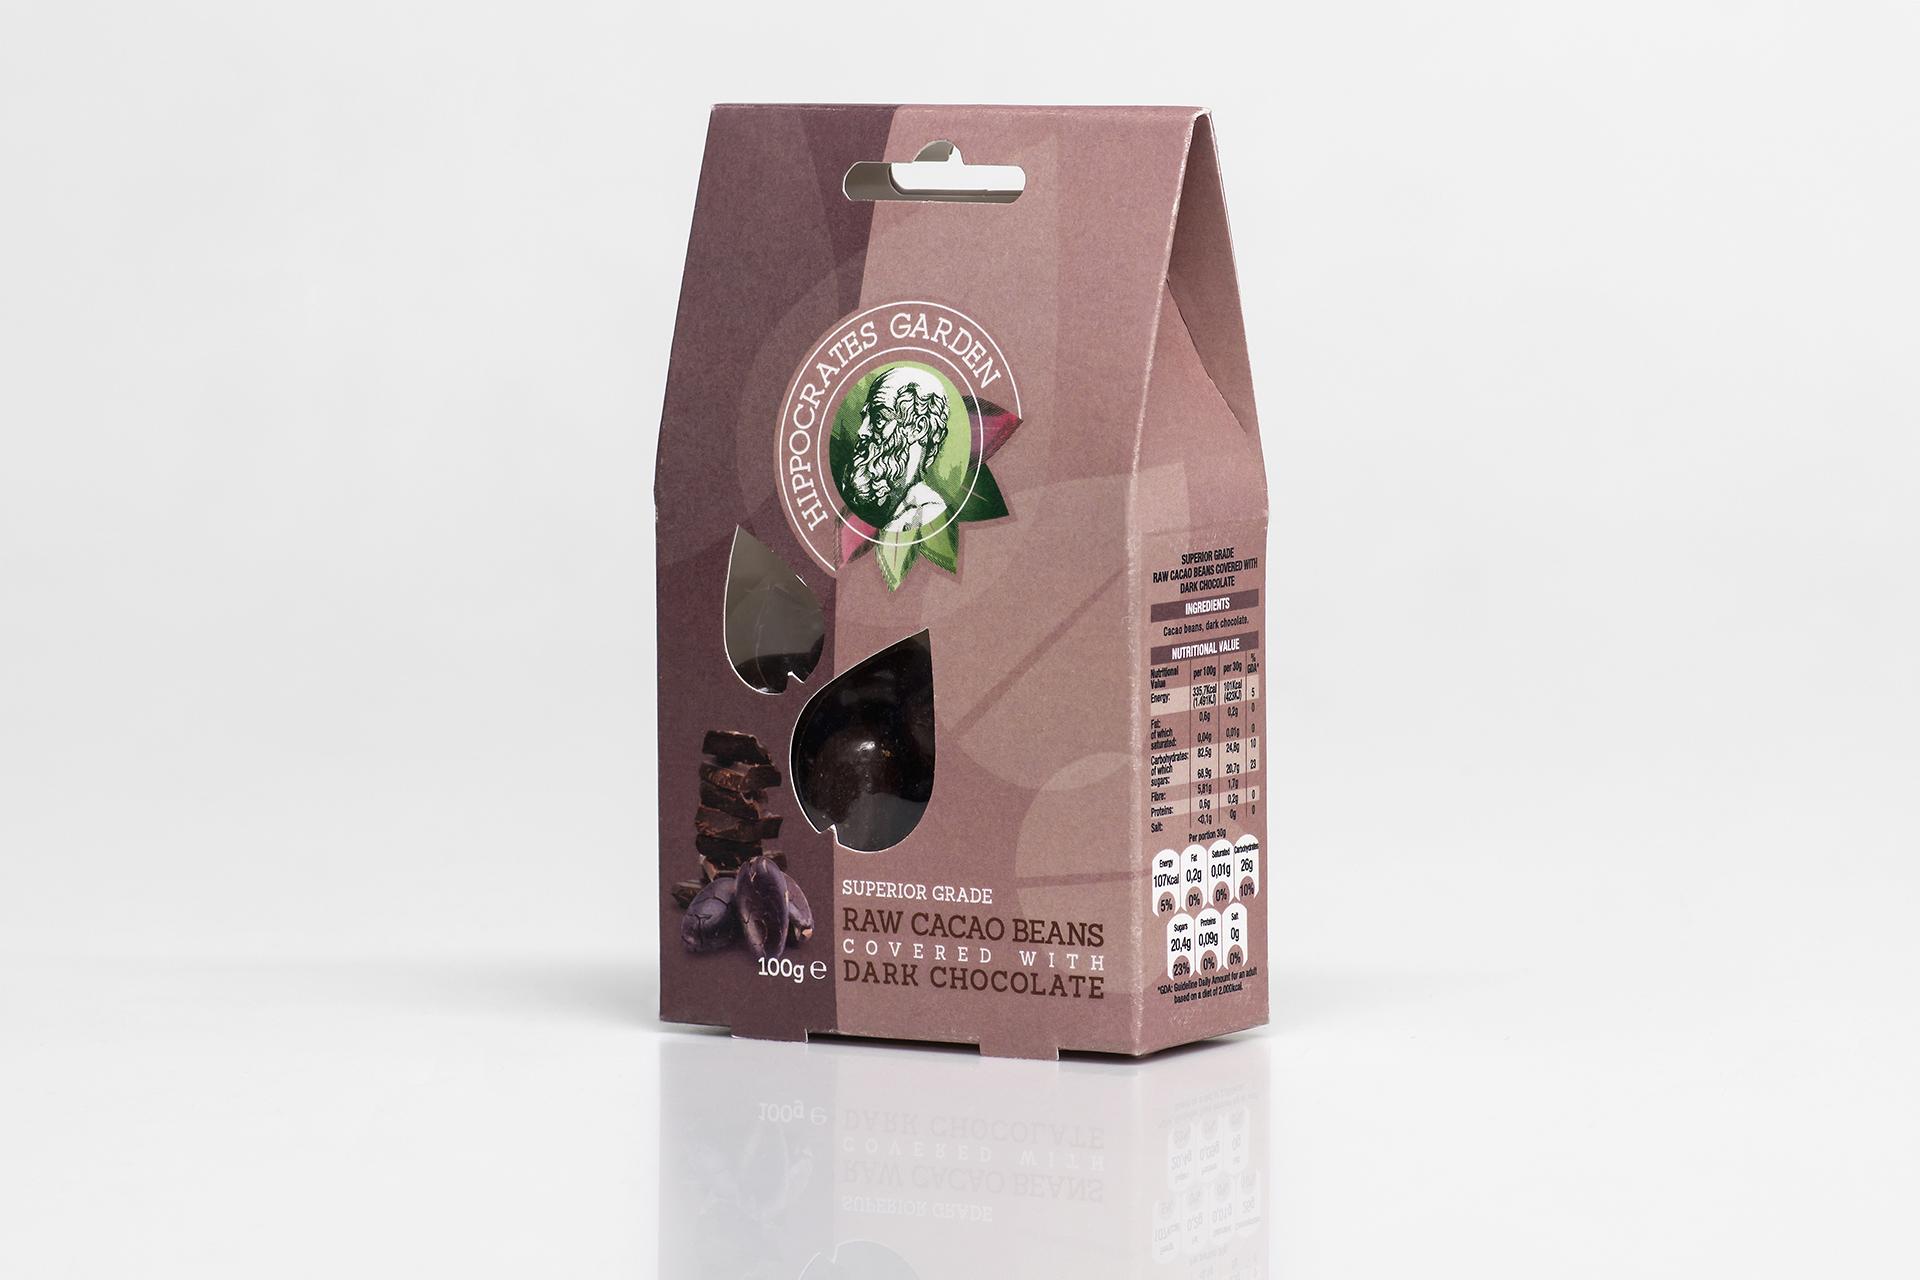 Raw cacao beans & dark chocolate packaging